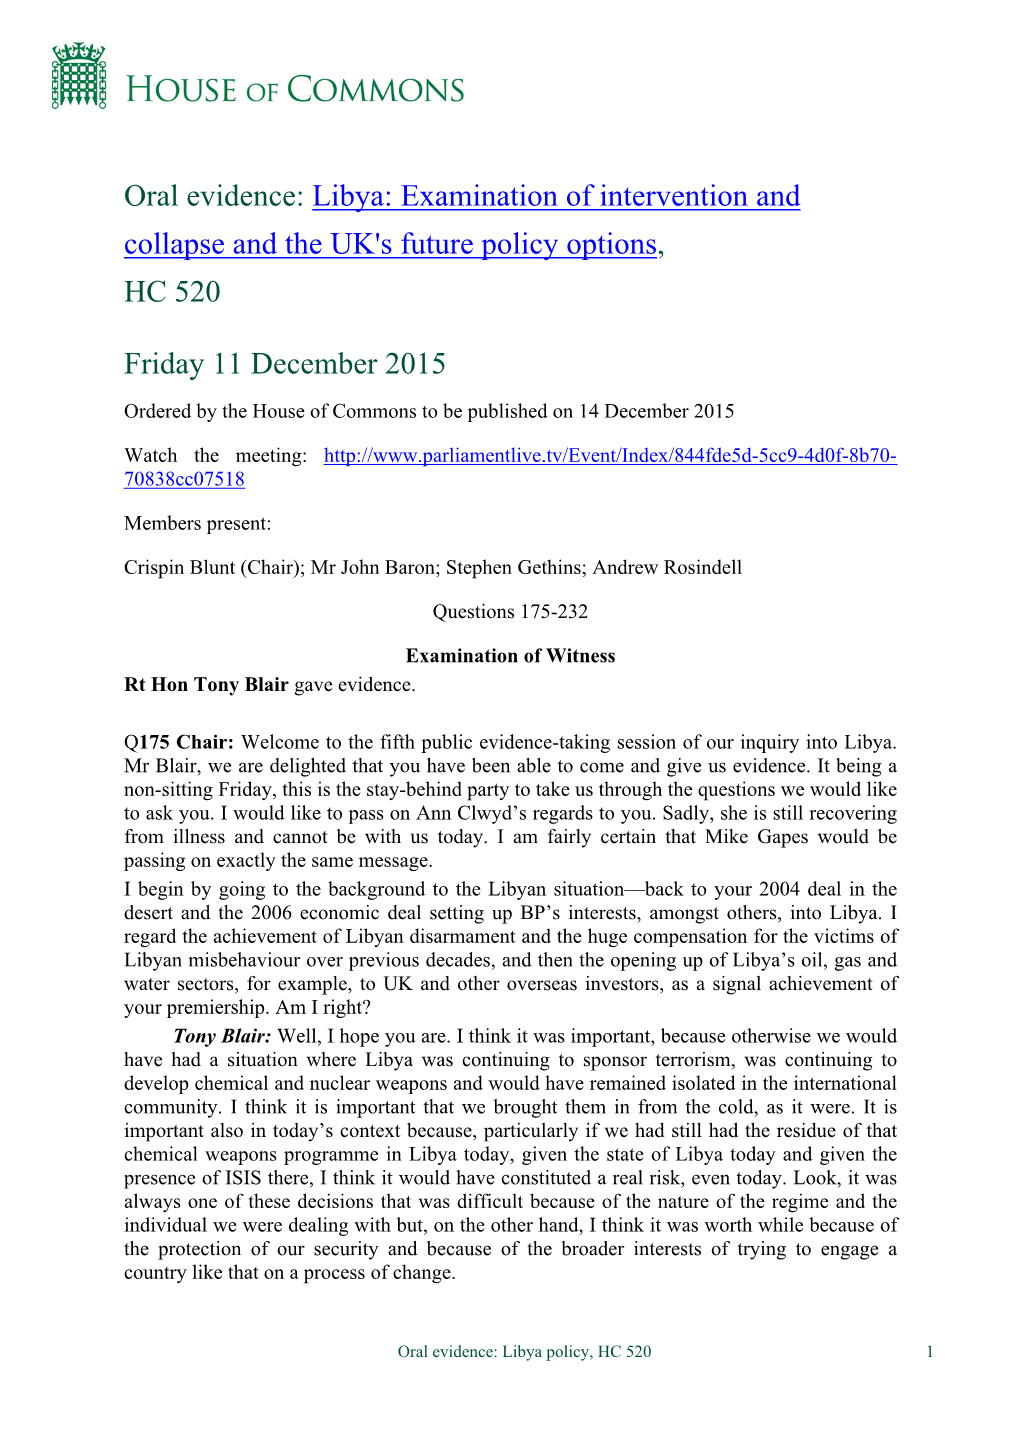 Oral Evidence: Libya: Examination of Intervention and Collapse and the UK's Future Policy Options, HC 520